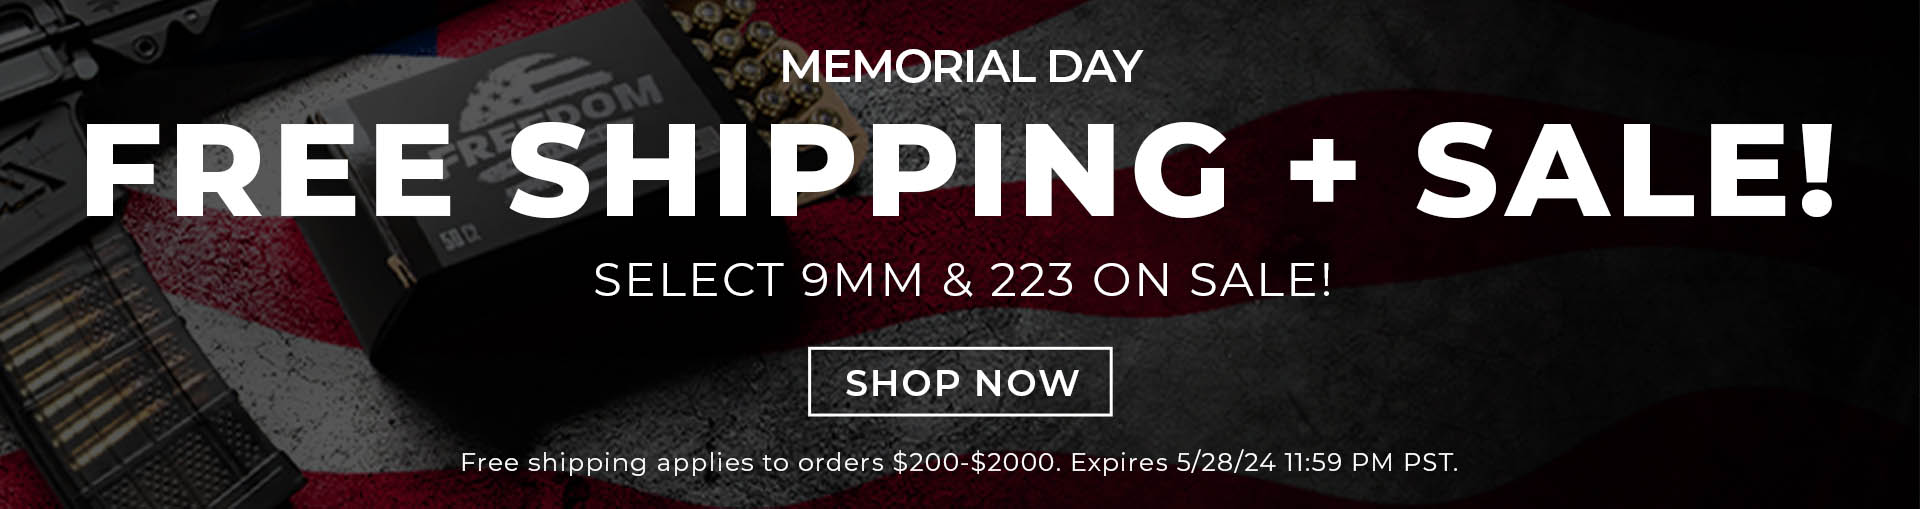 Memorial Day SALE + FREE Shipping! Orders $200-$2000